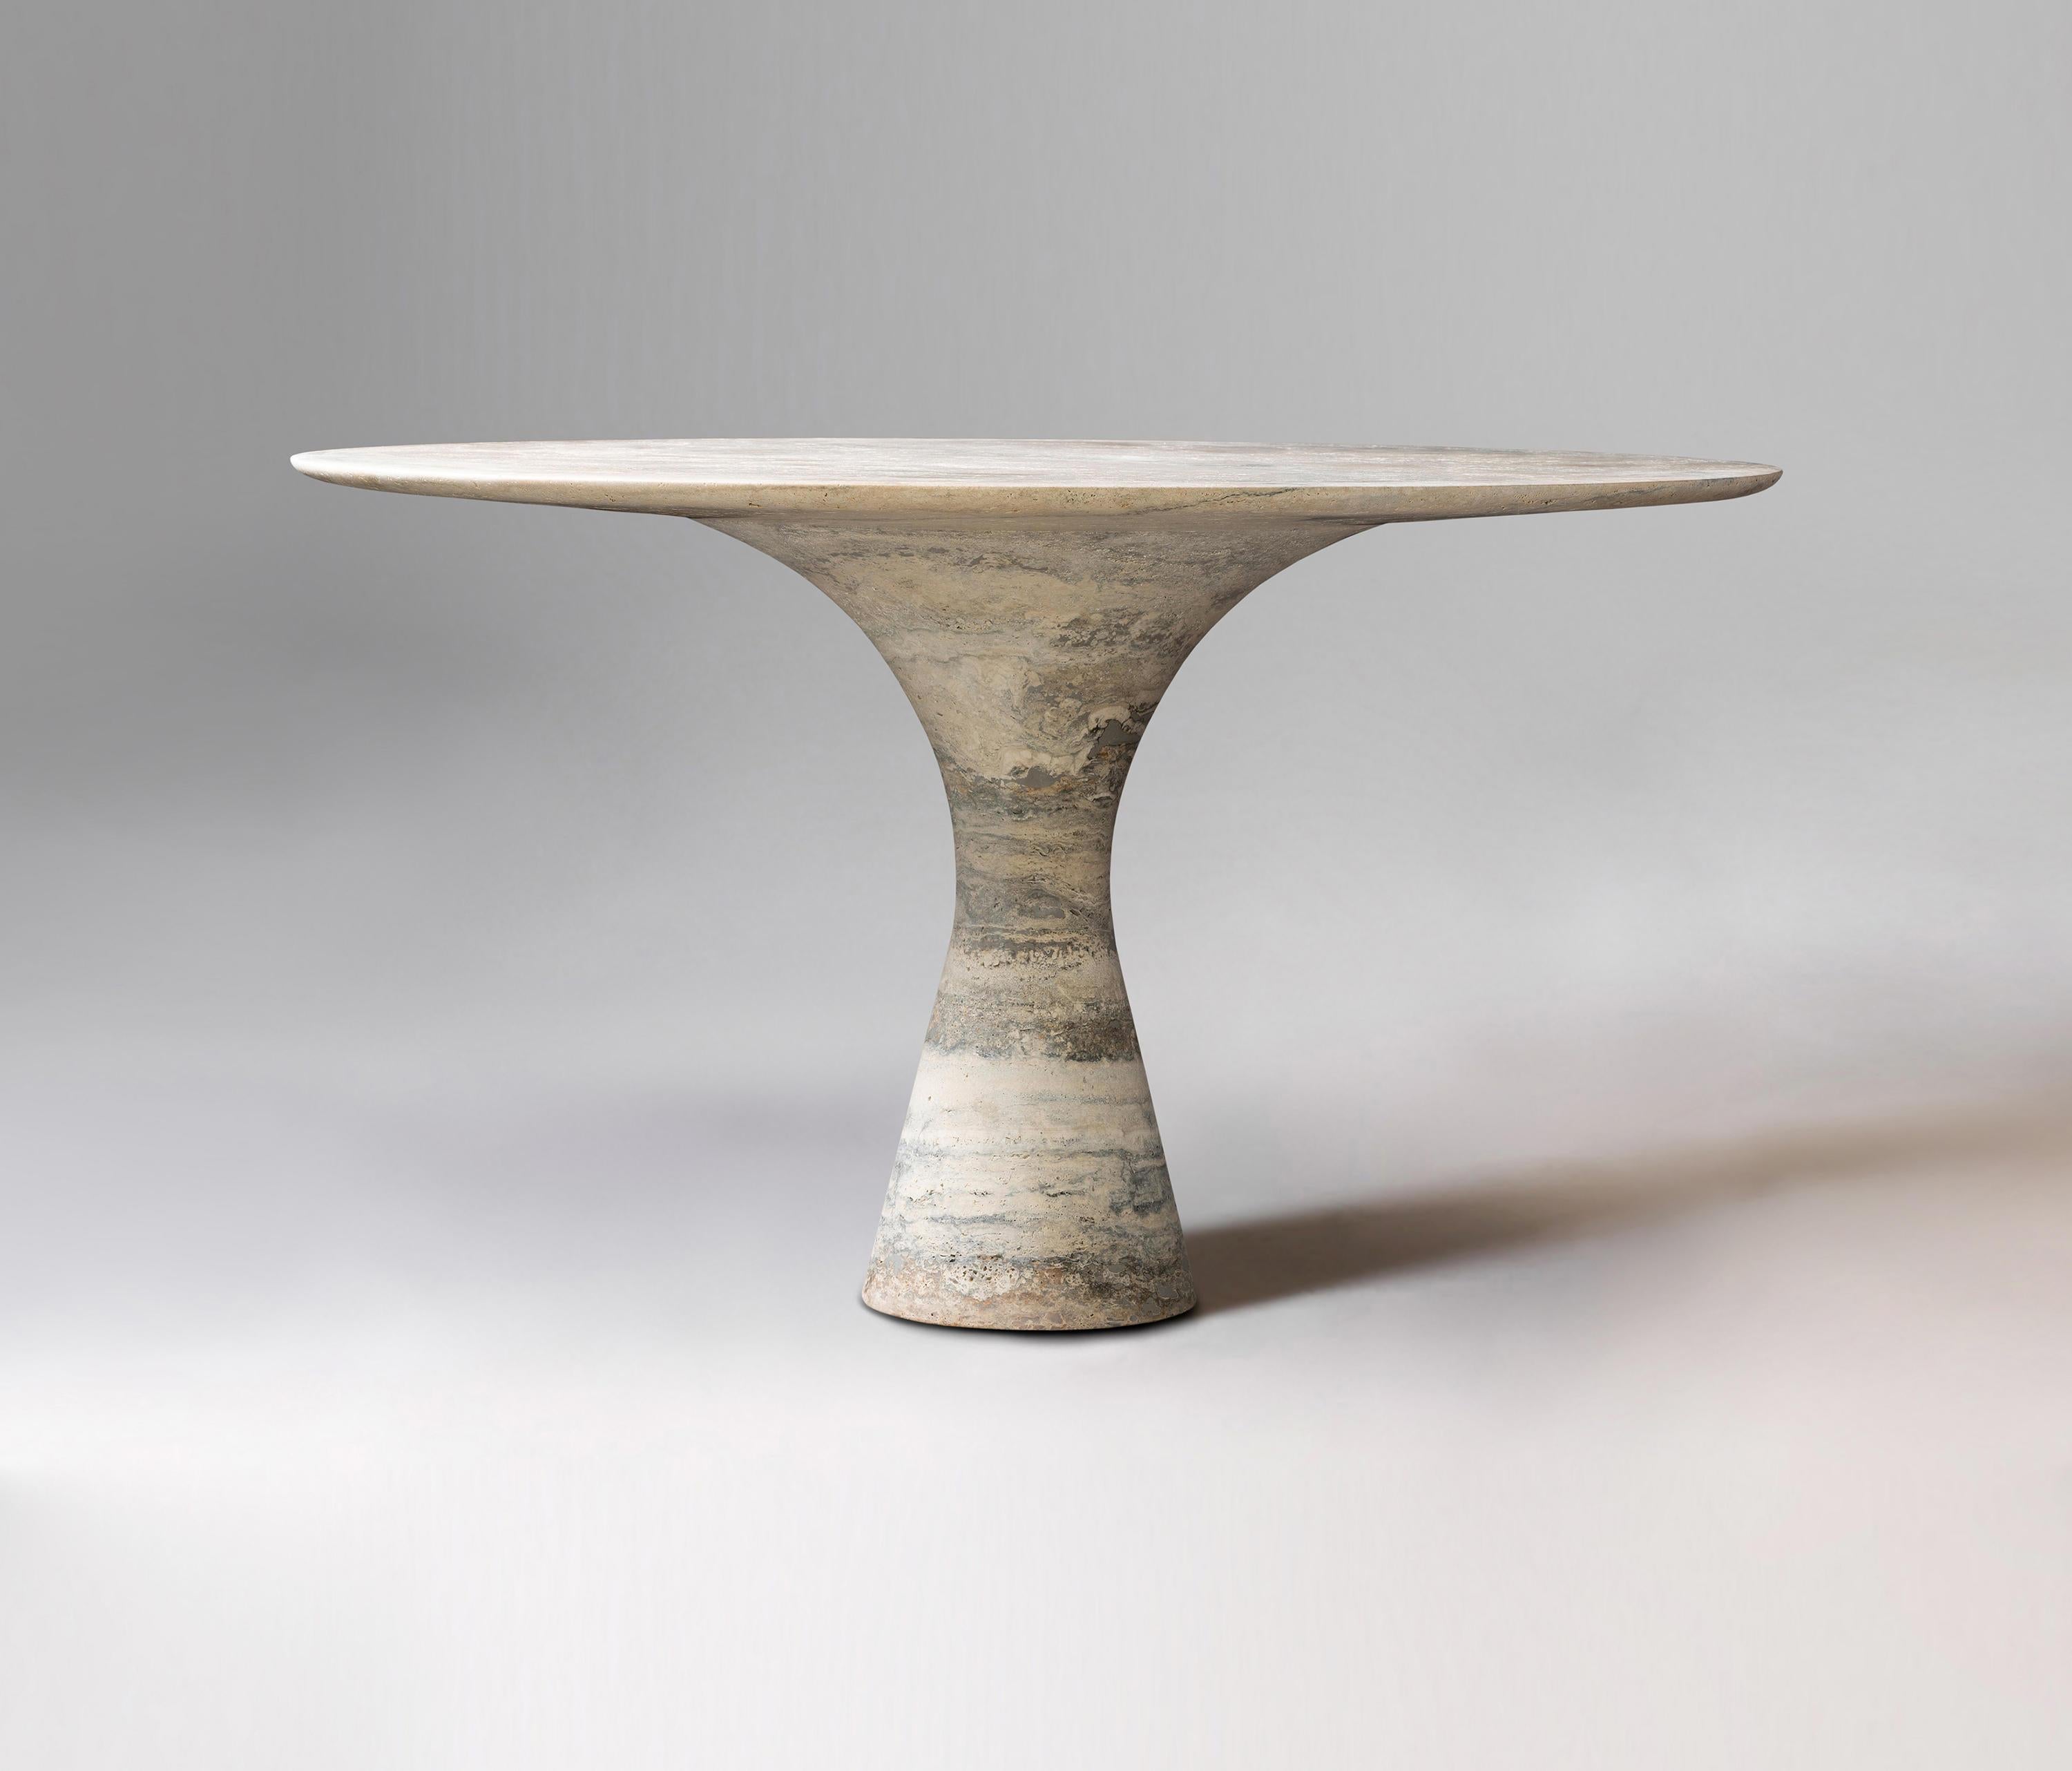 Post-Modern Travertino Silver Refined Contemporary Marble Dining Table 160/75 For Sale